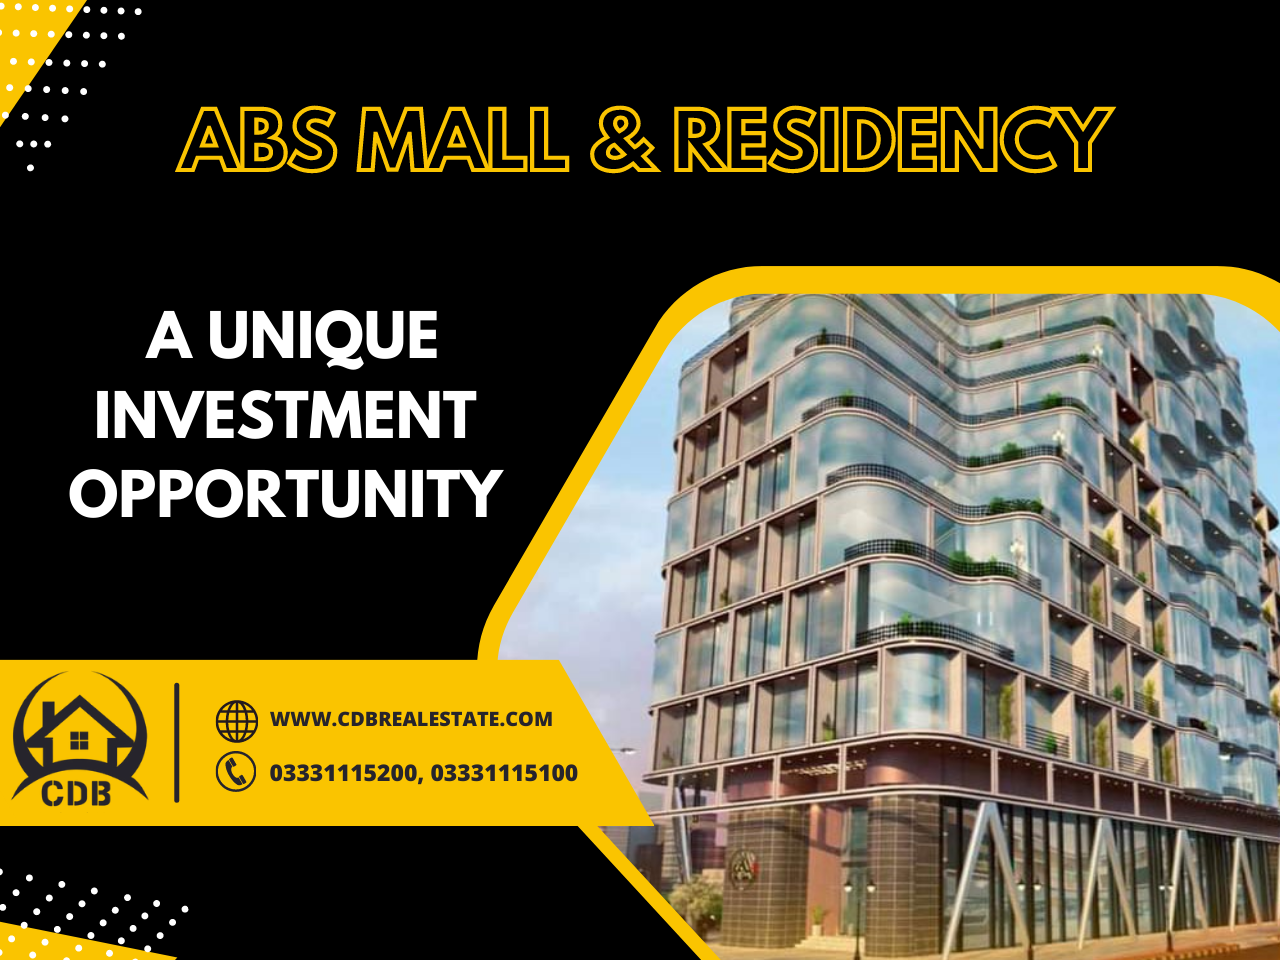 ABS Mall & Residency